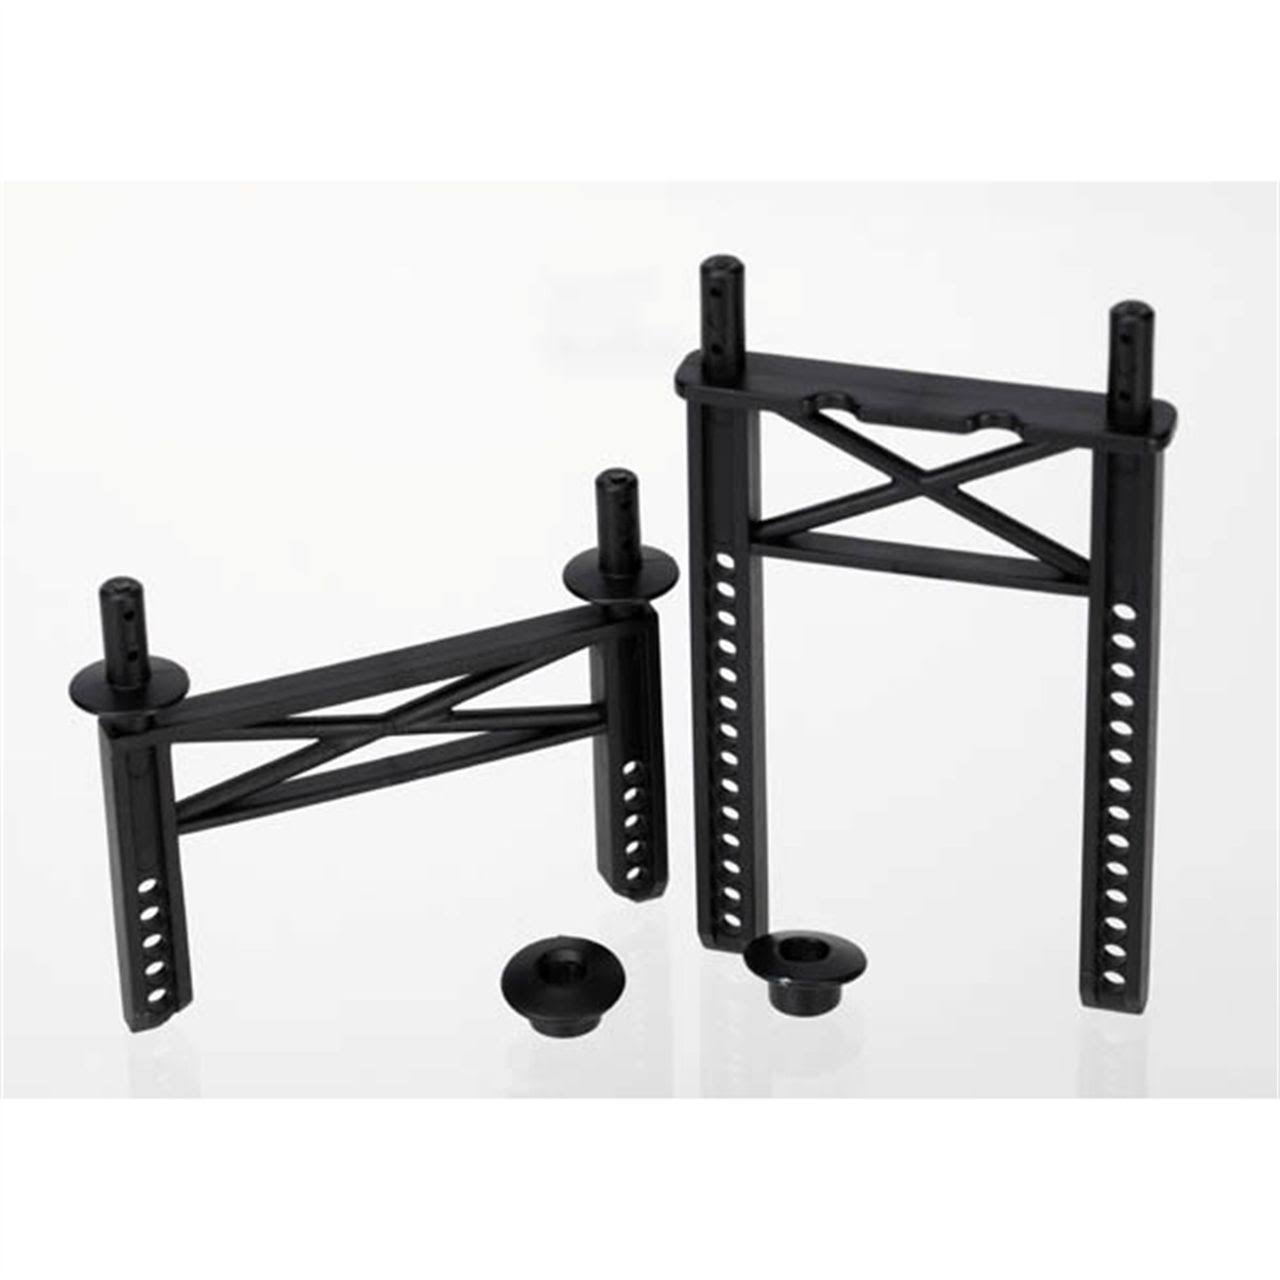 Traxxas 7216 Front and Rear Body Mounts - Scale 1:16